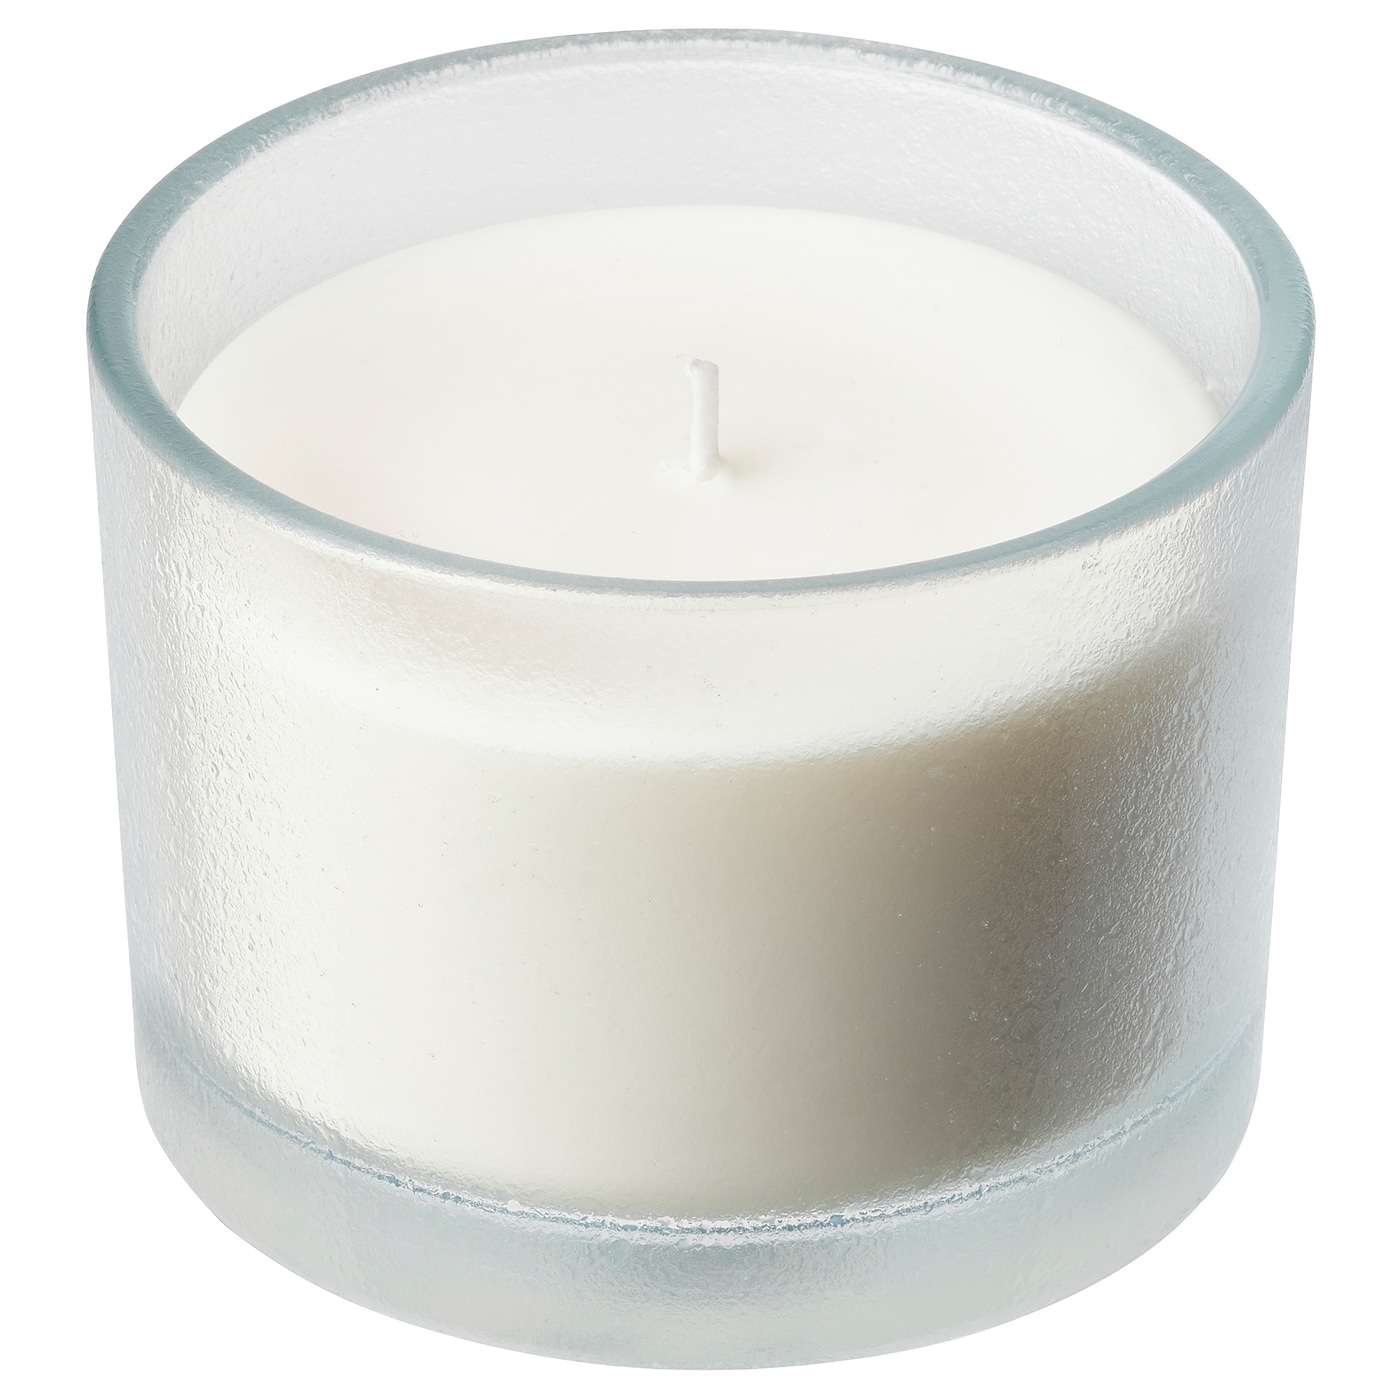 adlad-scened-candle-in-glass-scandinavian-woods-white__1060255_pe849864_s5